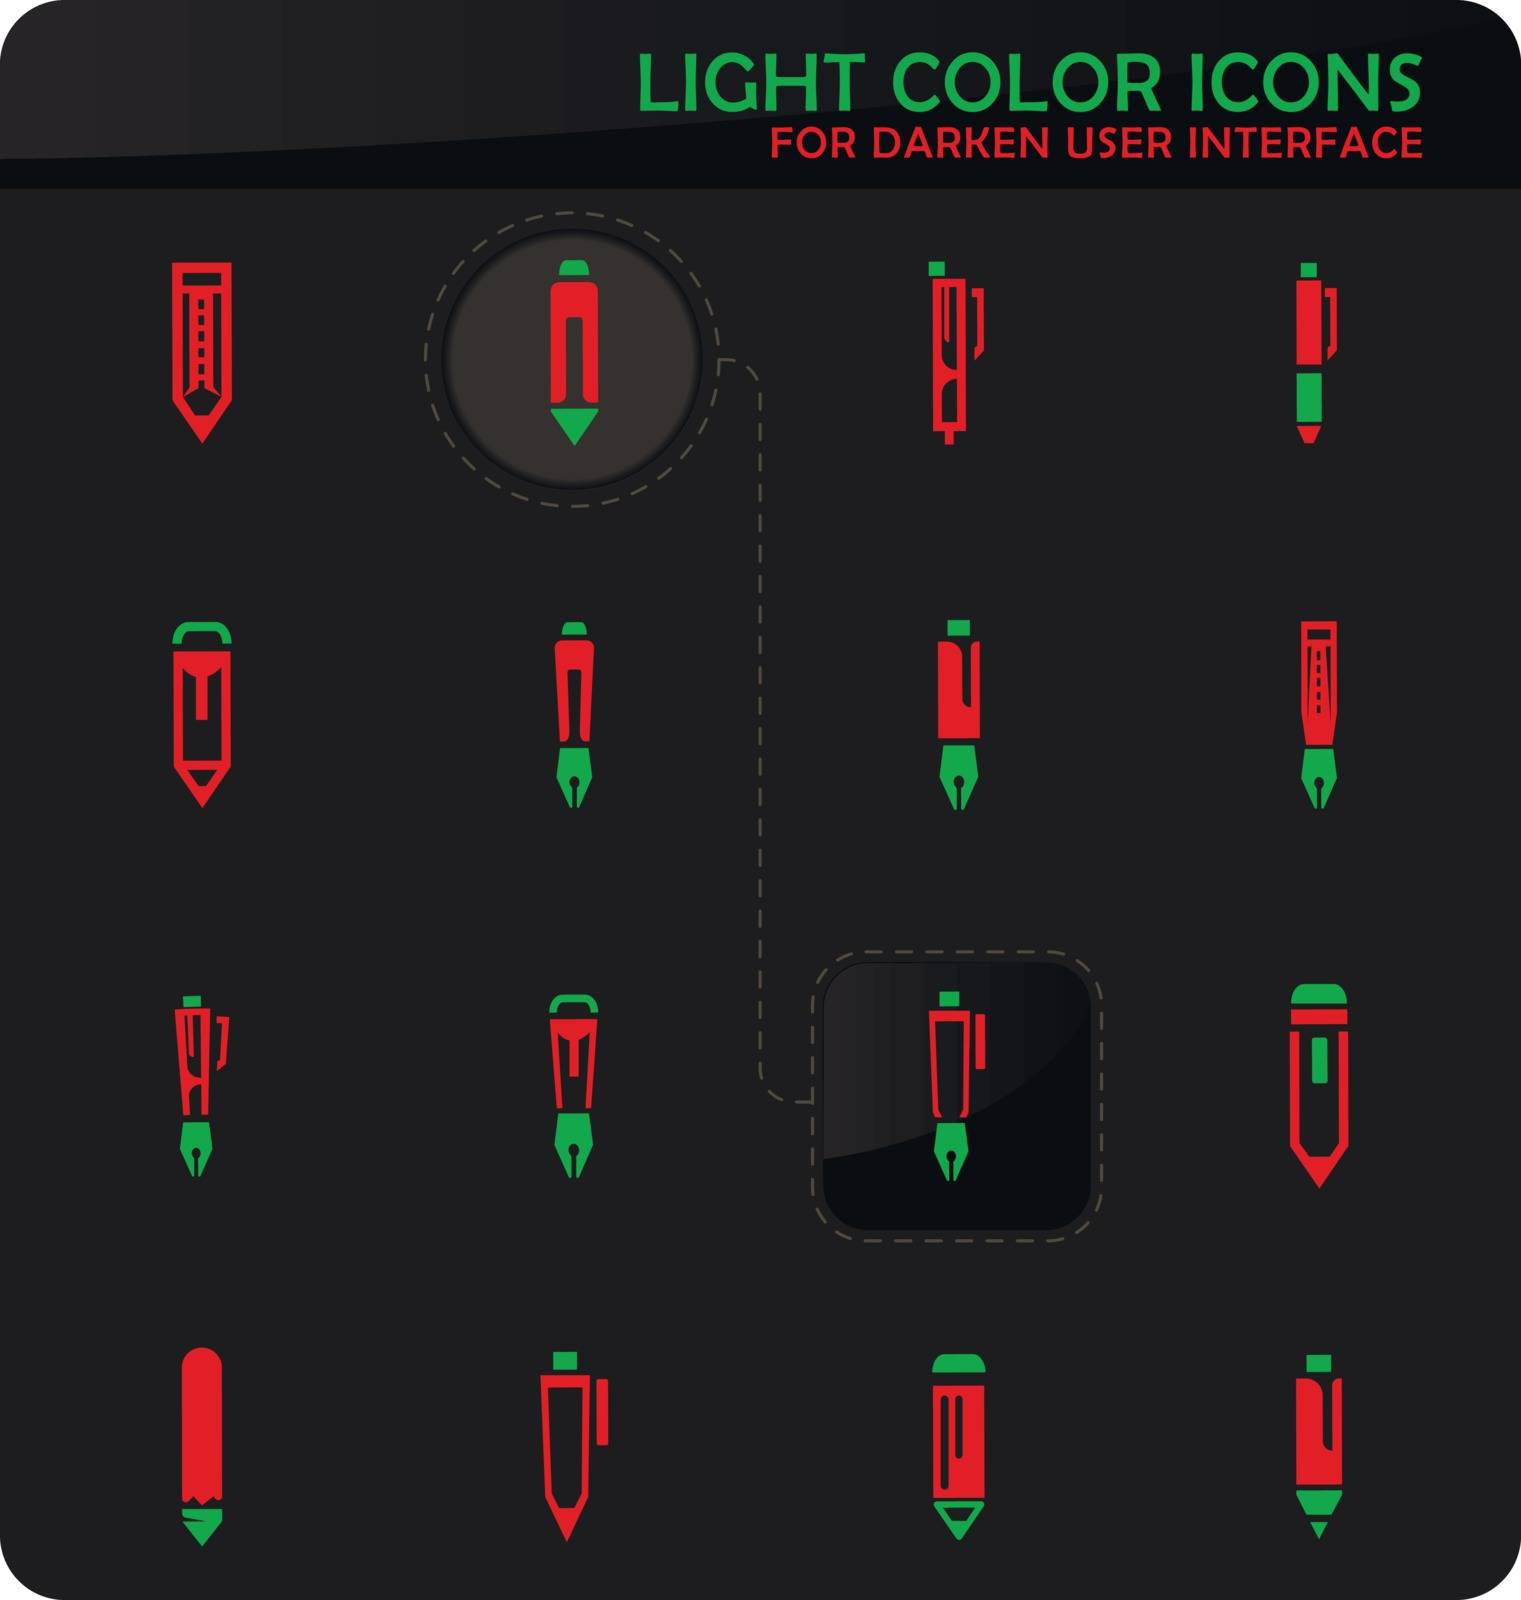 Edit easy color vector icons on darken background for user interface design